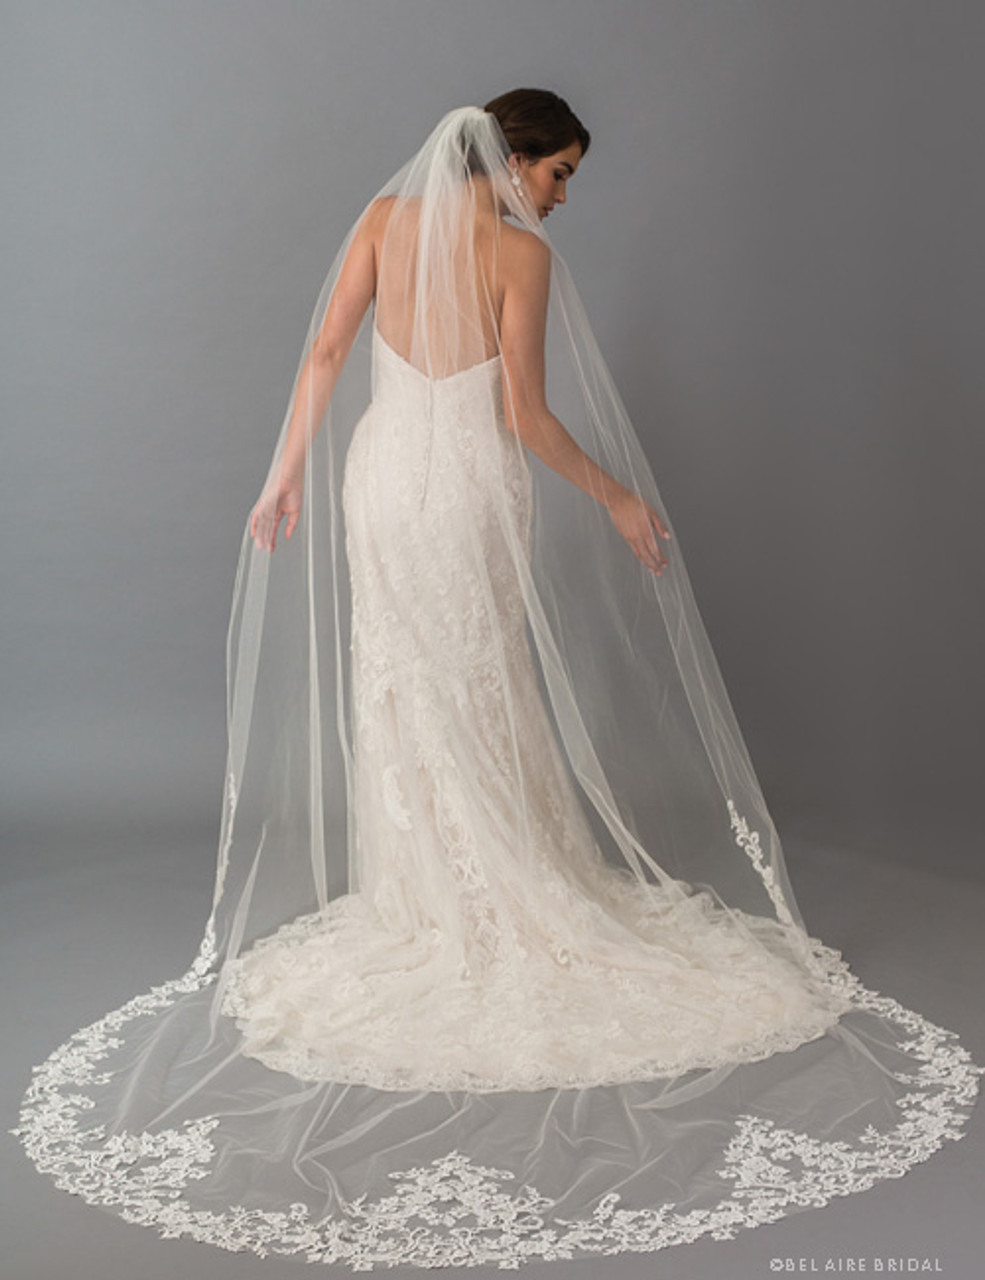 Bel Aire Bridal Veils V7414C - 1-tier cathedral veil with rolled edge and dramatic Venise lace points